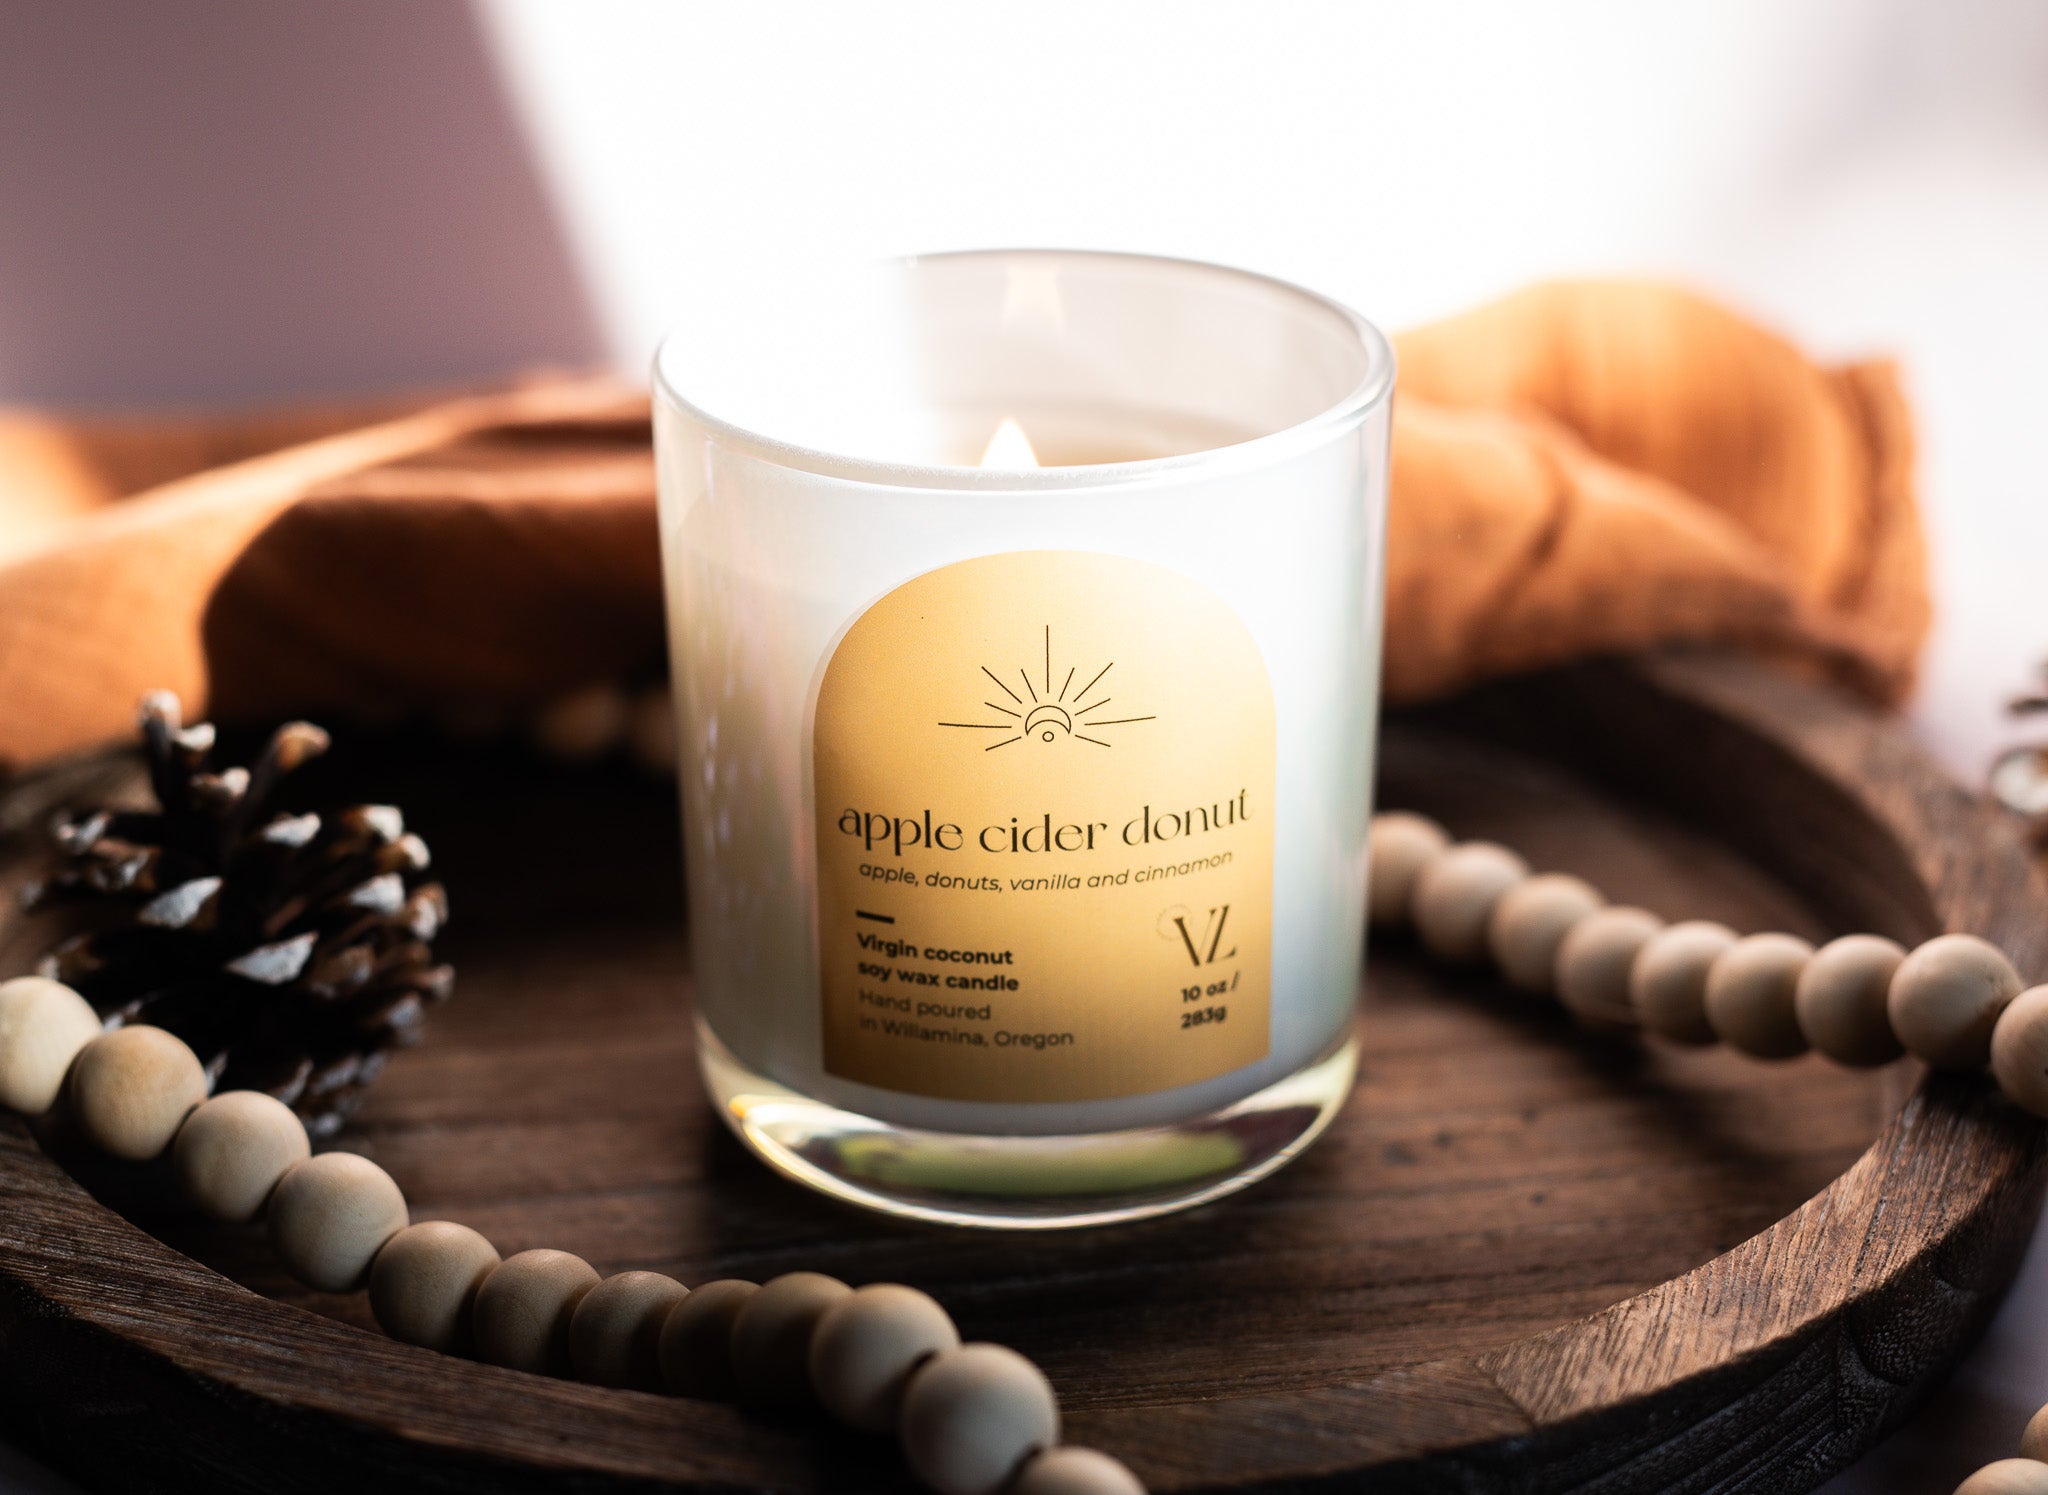 Apple cider donut coconut soy wax candle | apple, donuts, vanilla and cinnamon - Vincent Land Candle Co.